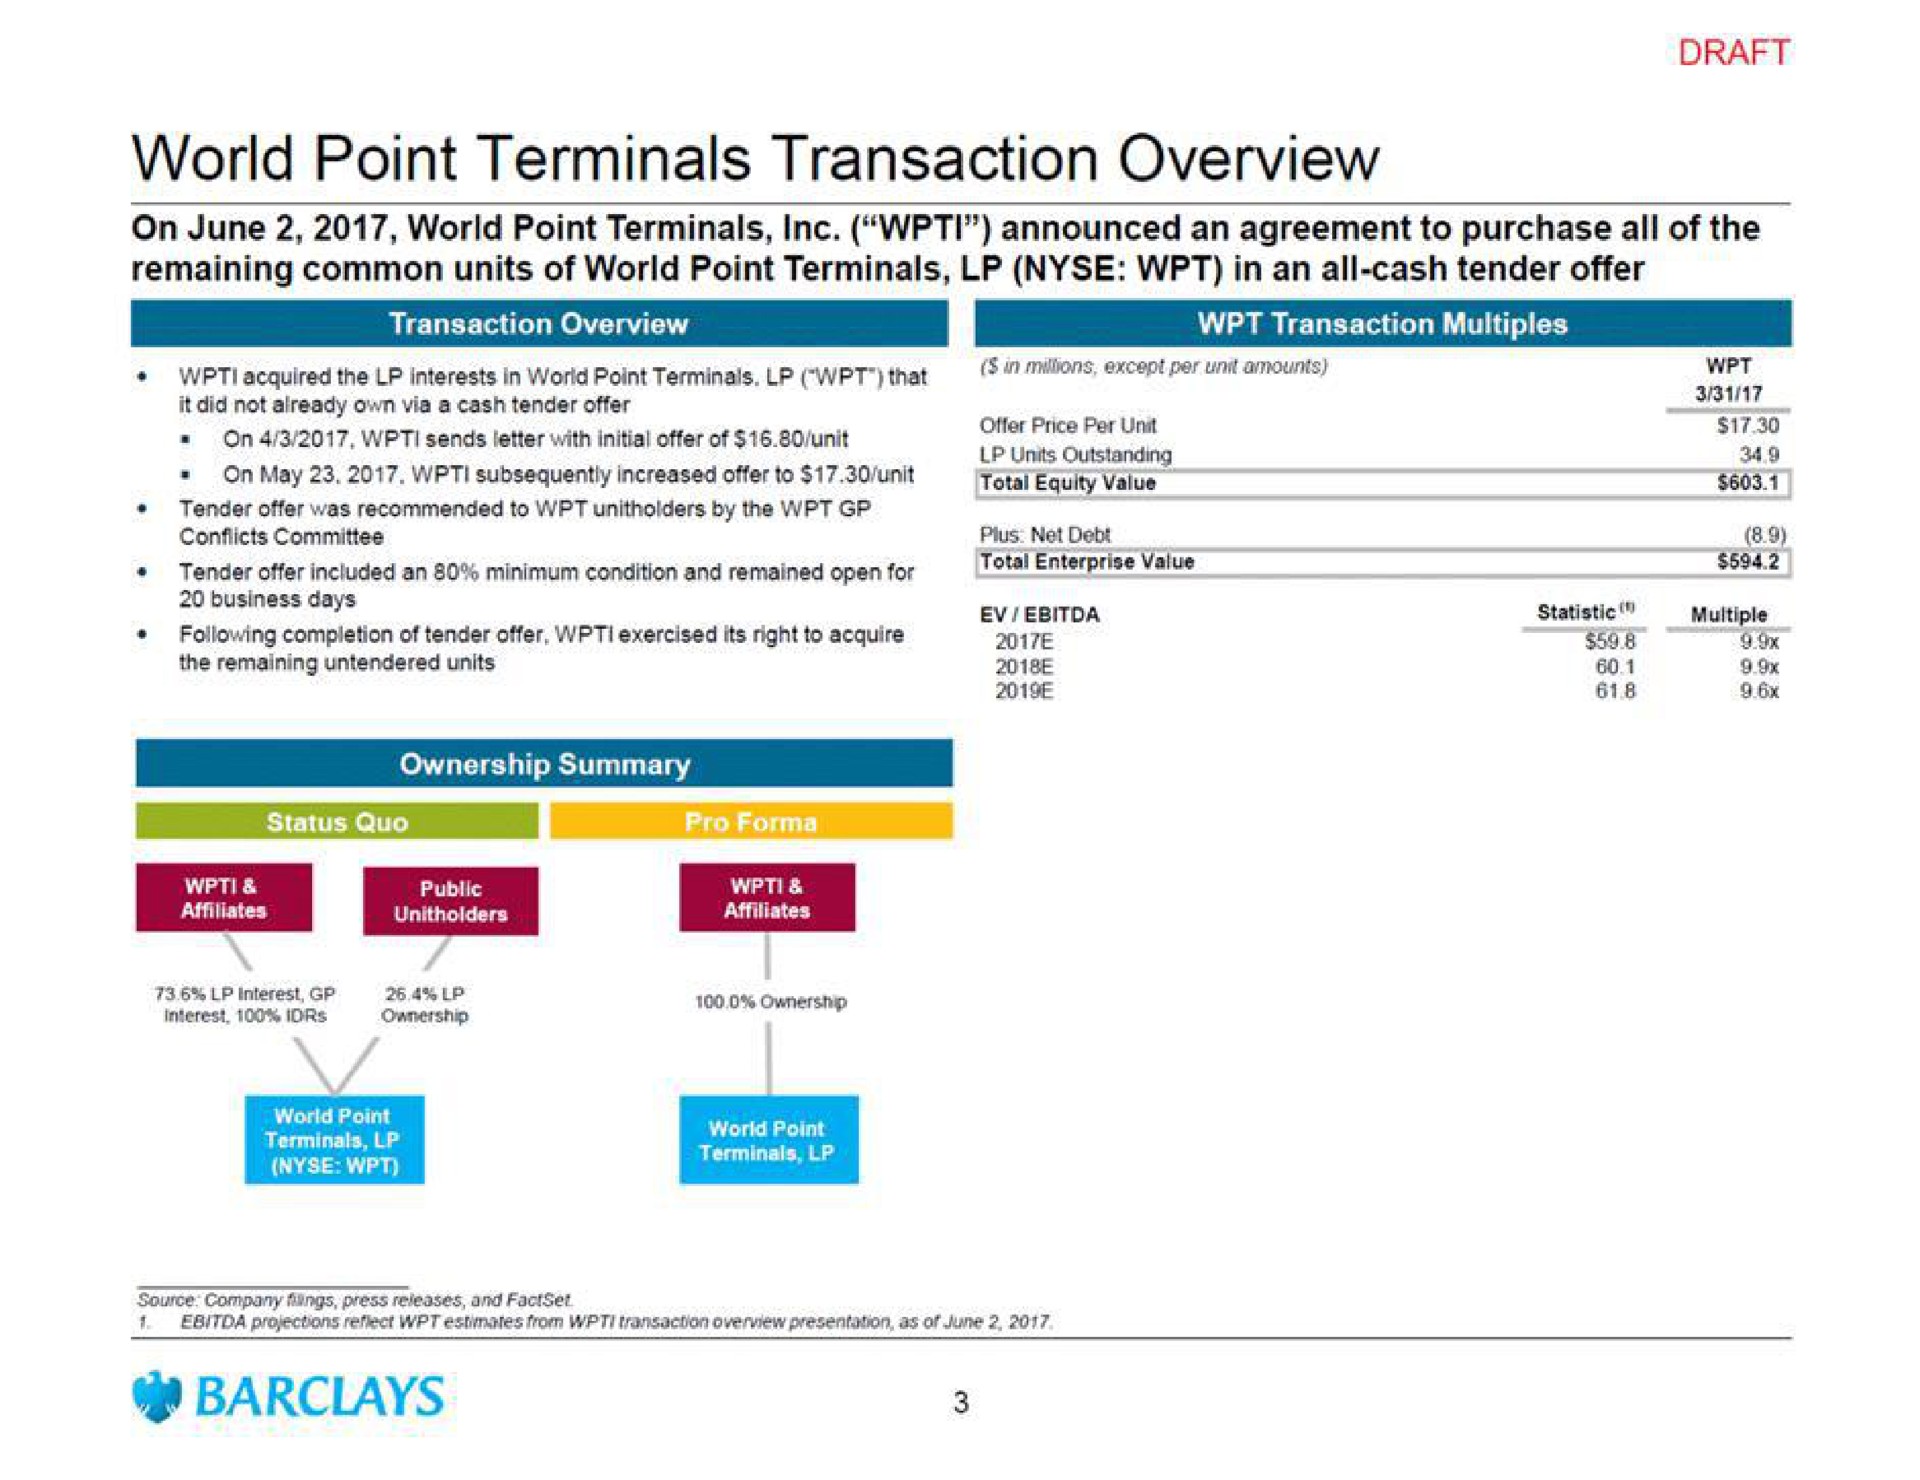 world point terminals transaction overview | Barclays